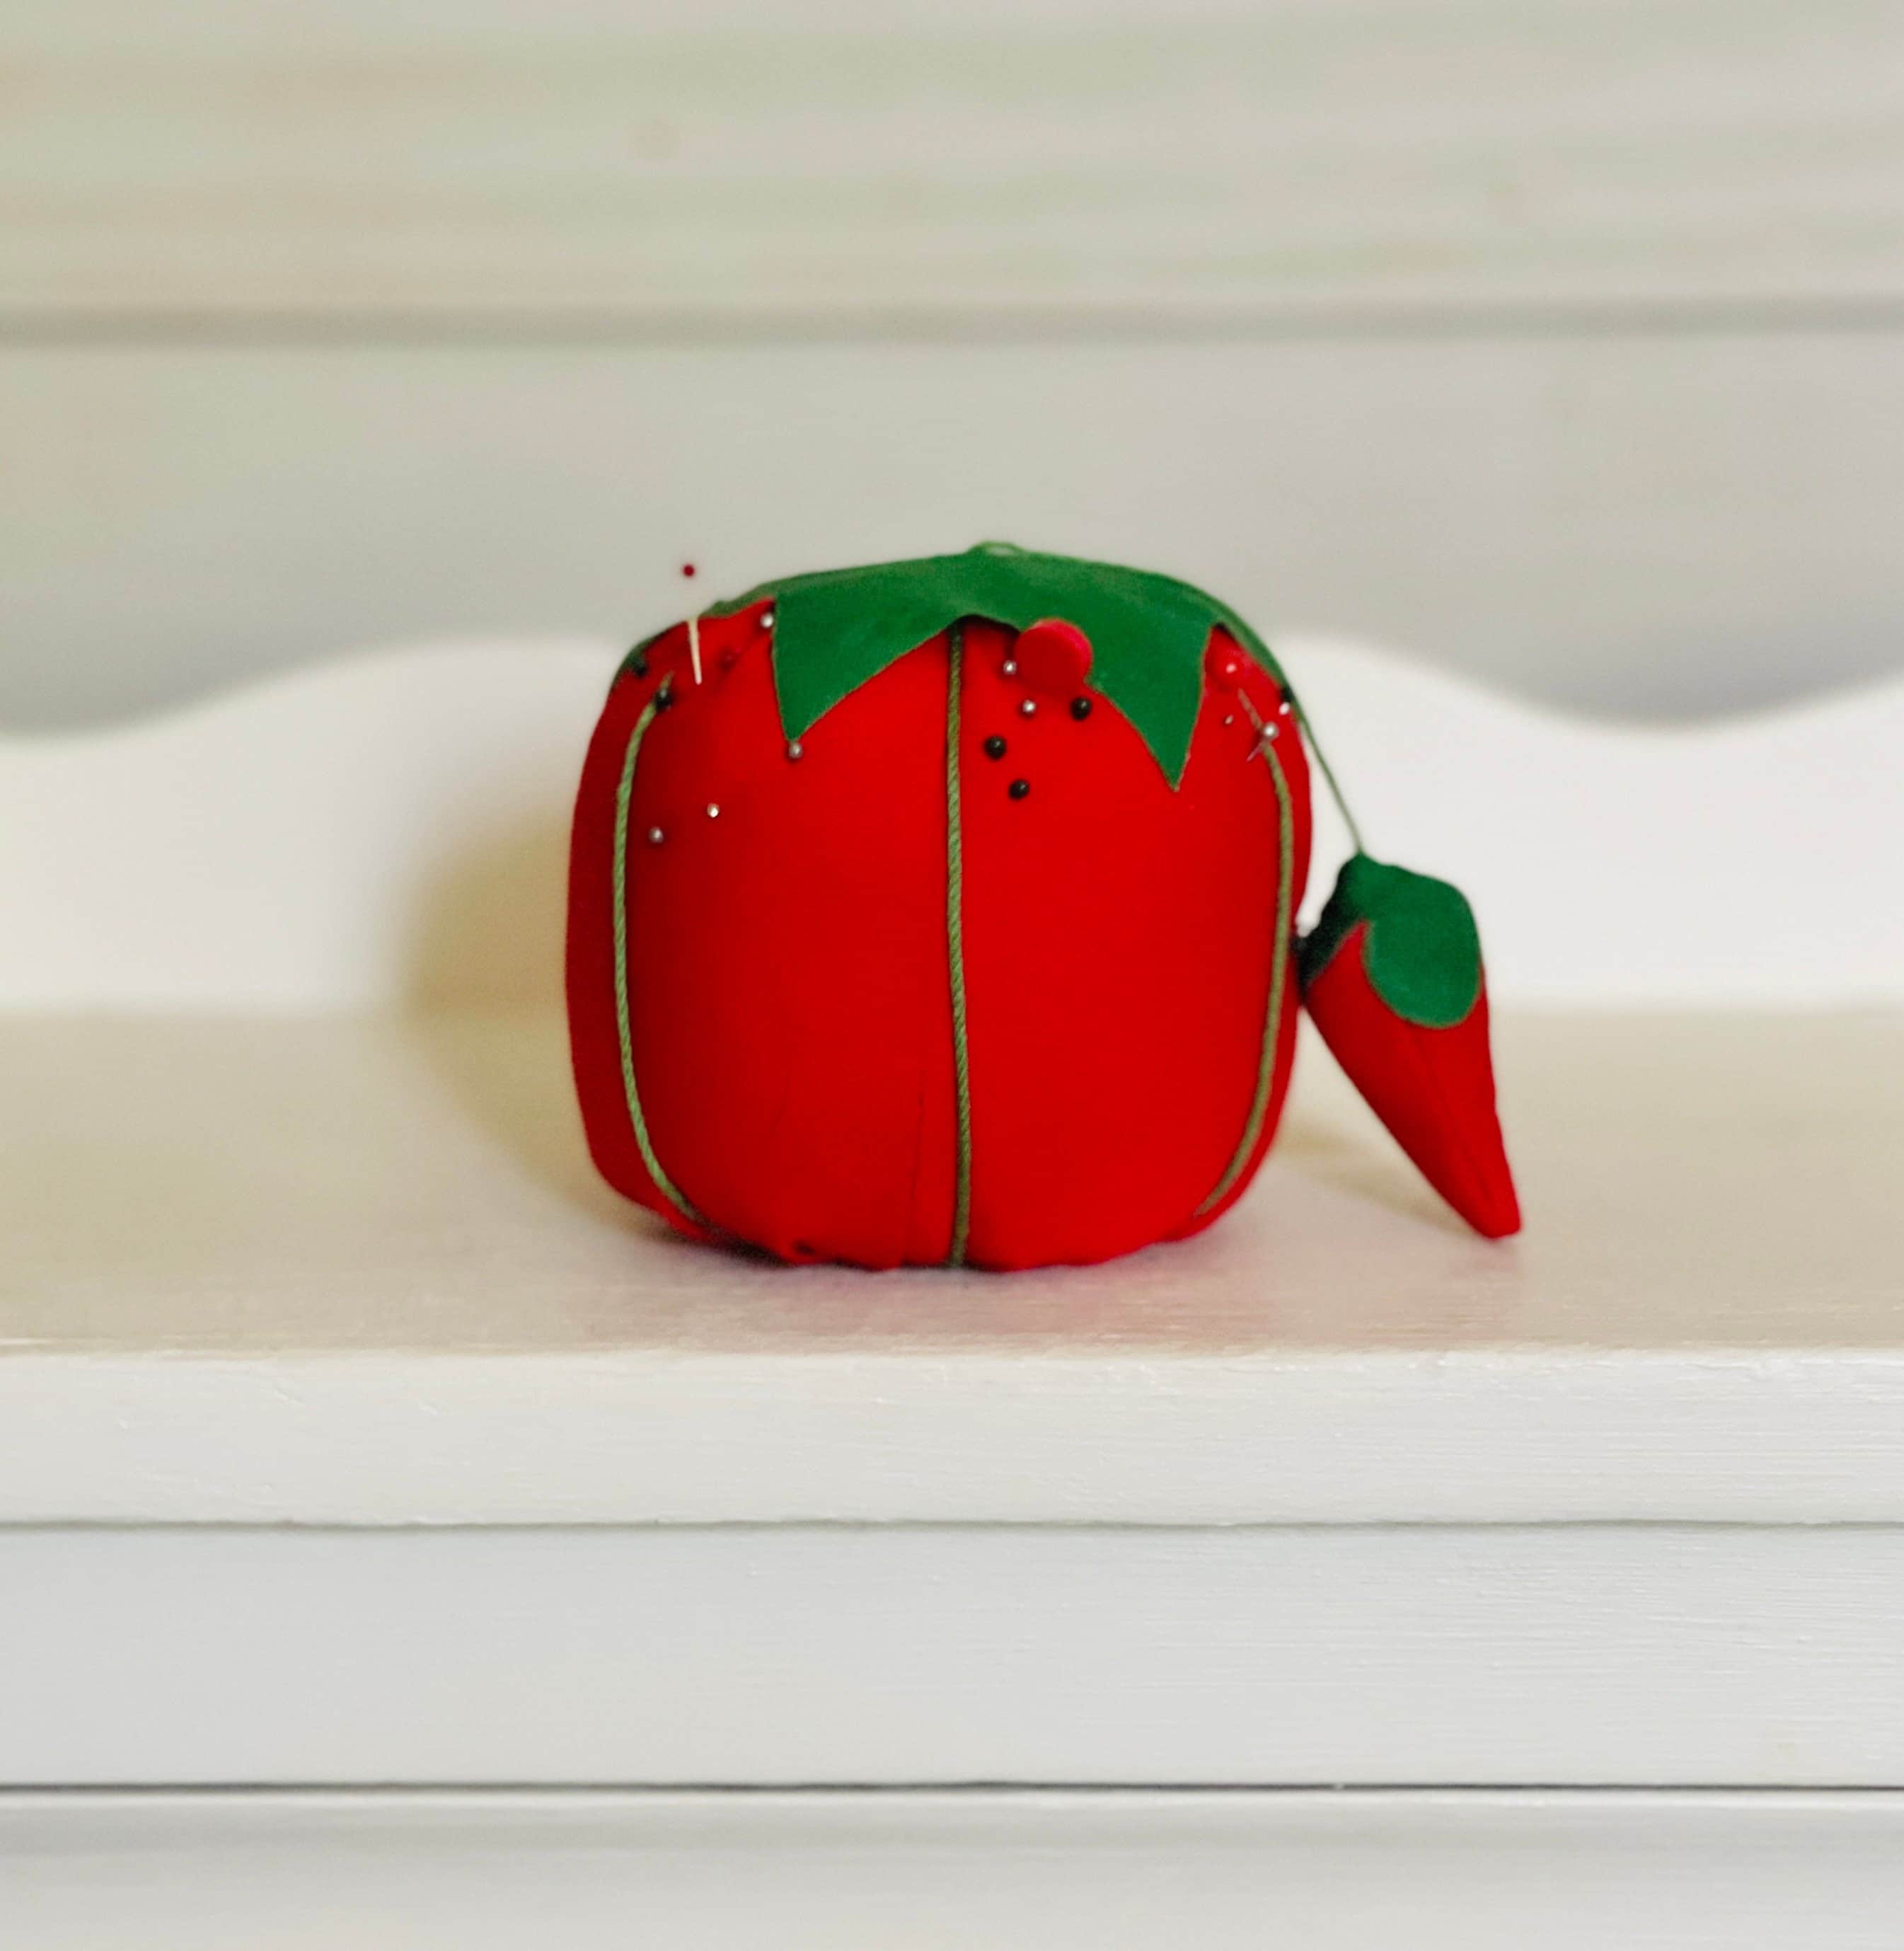 How to Make a Tomato Pin Cushion